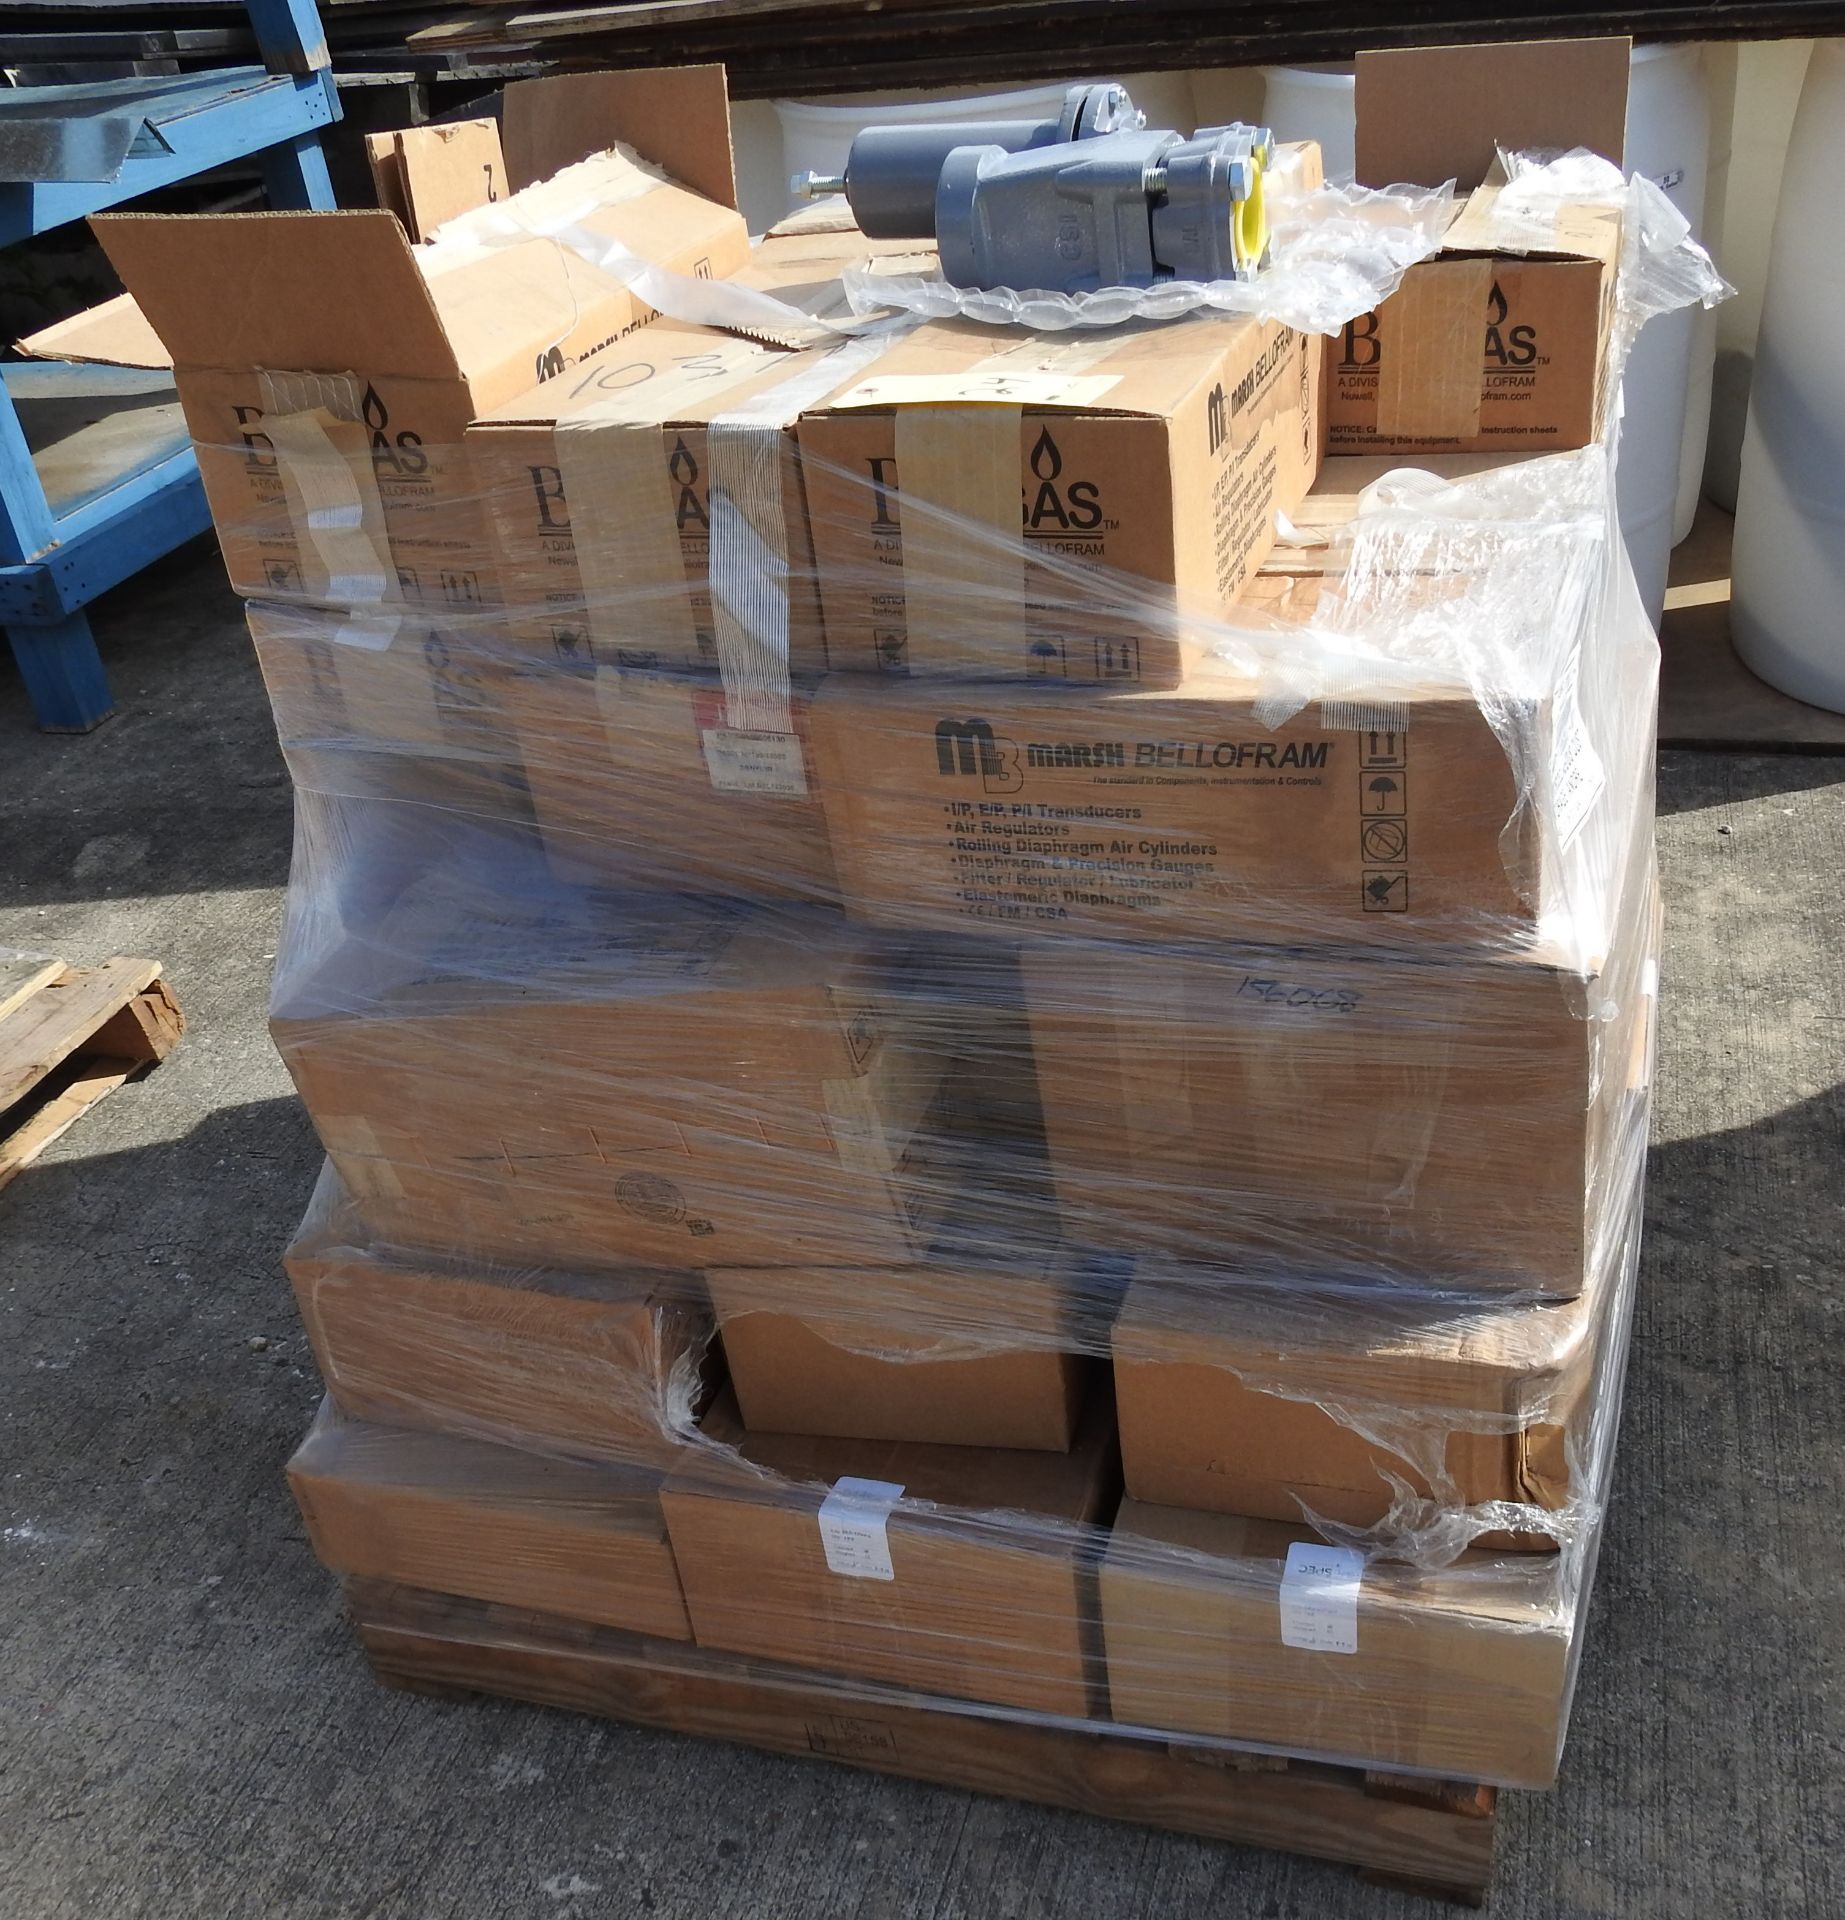 Lot of Pressure Relief Valves, BelGas, Mdl. P63 ** Located: 4402 Theiss Rd, Houston, TX 77338 ** - Image 8 of 8